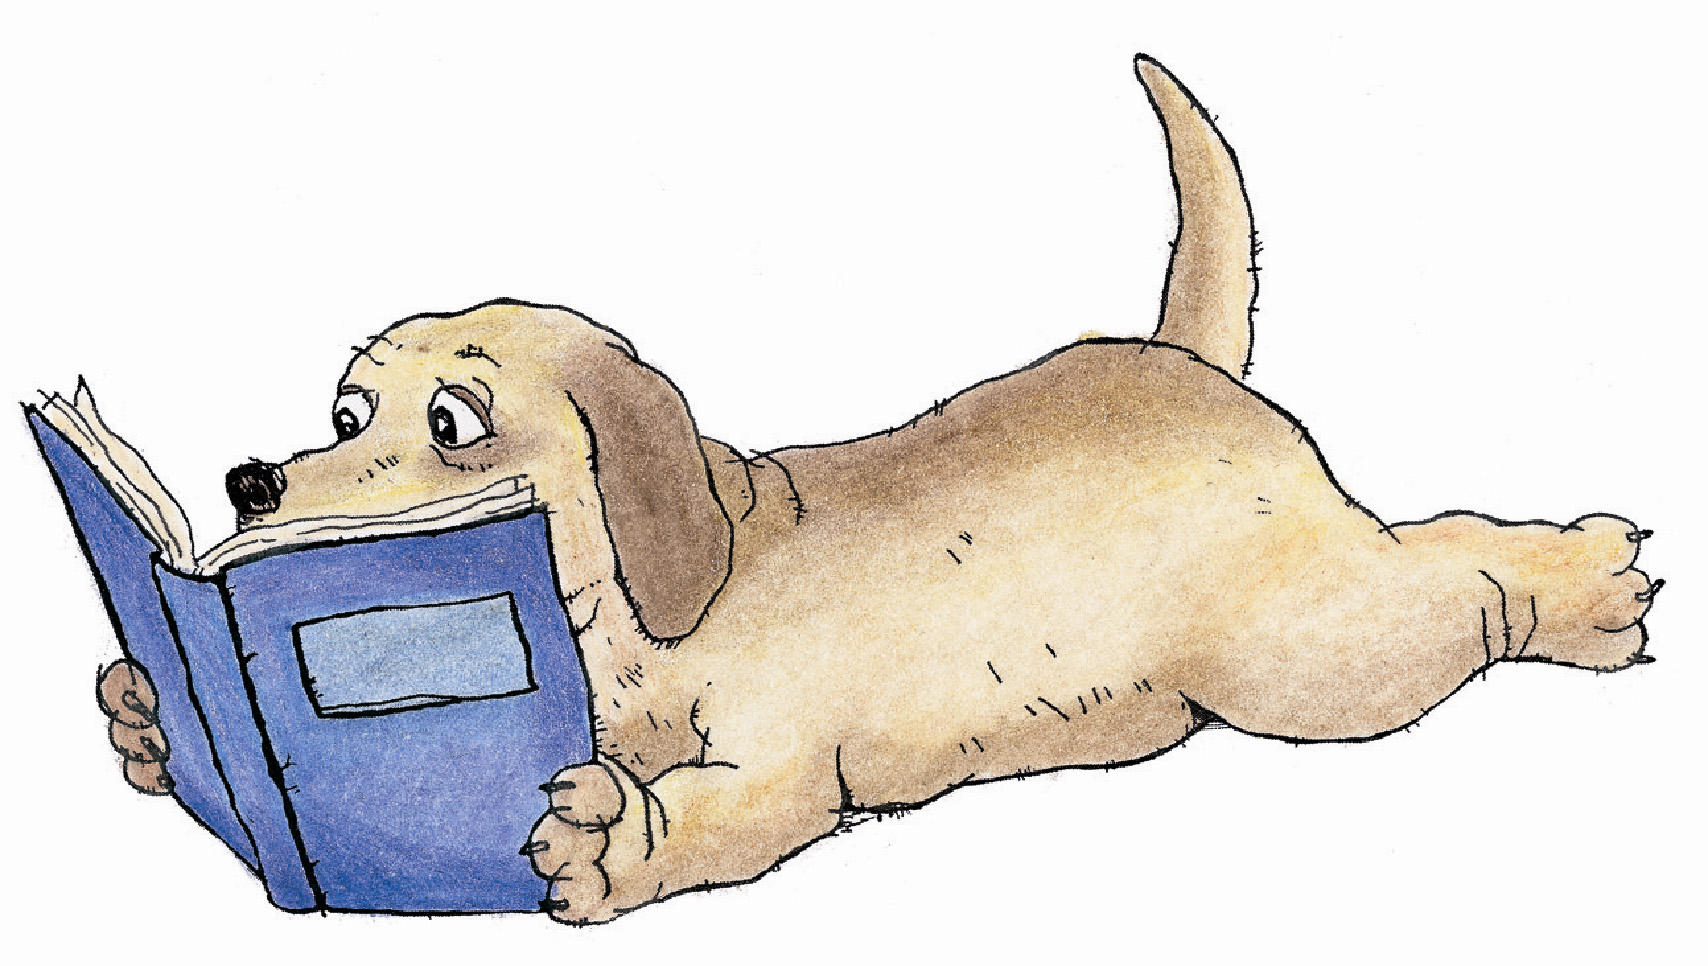 Tan dog, laying down with blue book in paws